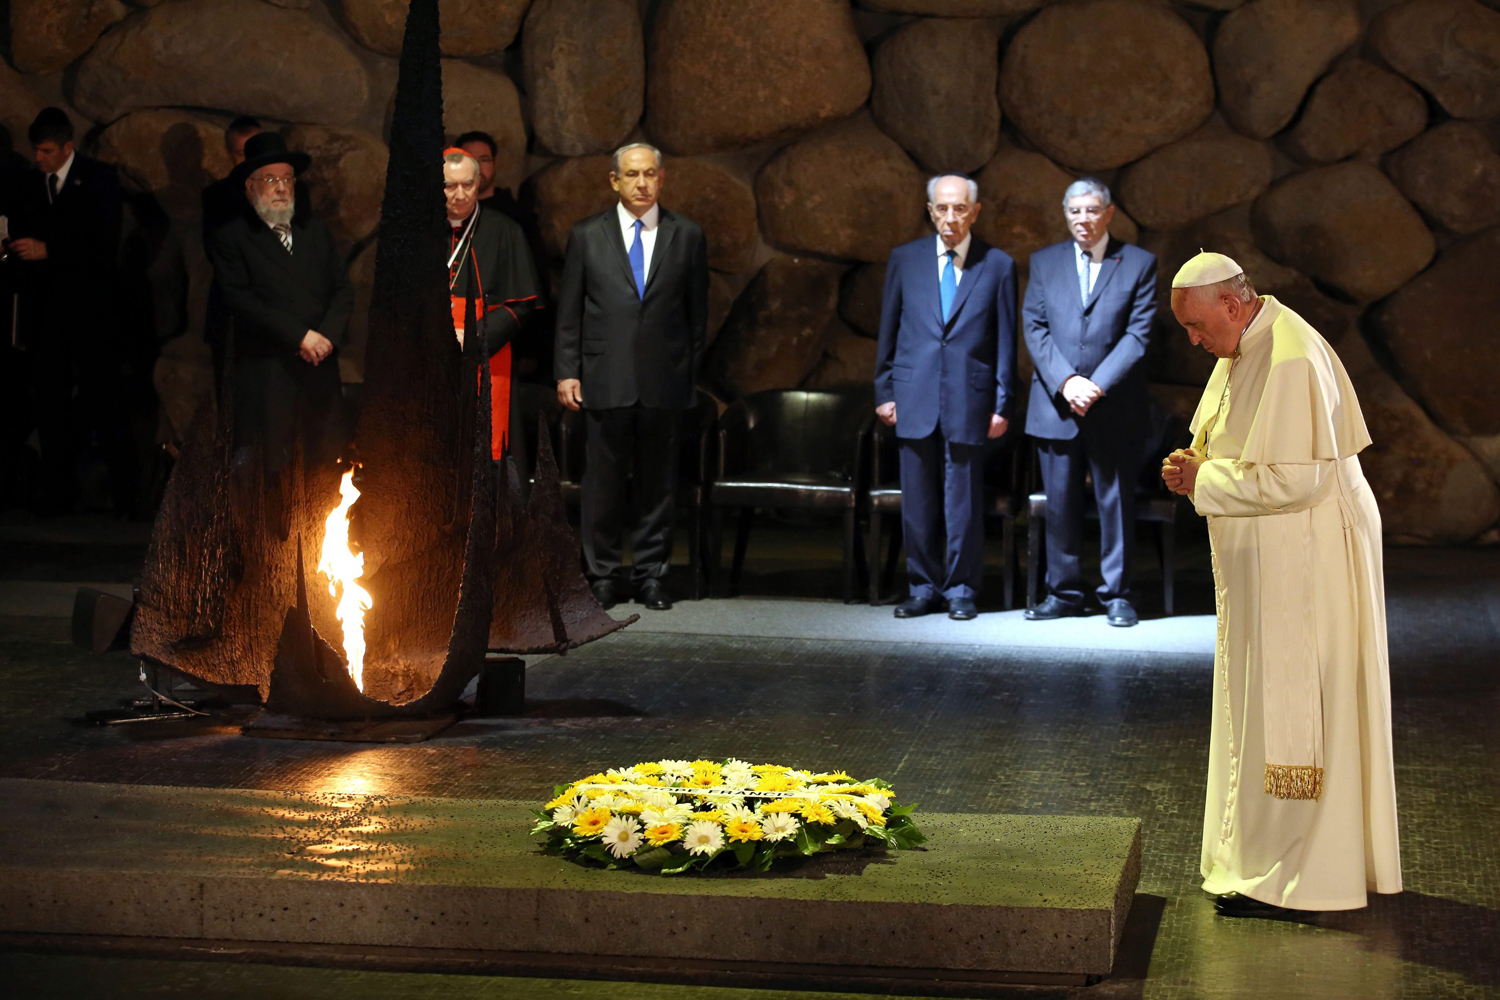 Pope Francis prays after laying a wreath as Israeli Prime Minister Benjamin Netanyahu and Israeli President Shimon Peres look on during a memorial ceremony in the Hall of Remembrances in the Yad Vashem Holocaust memorial in Jerusalem, May 26, 2014.